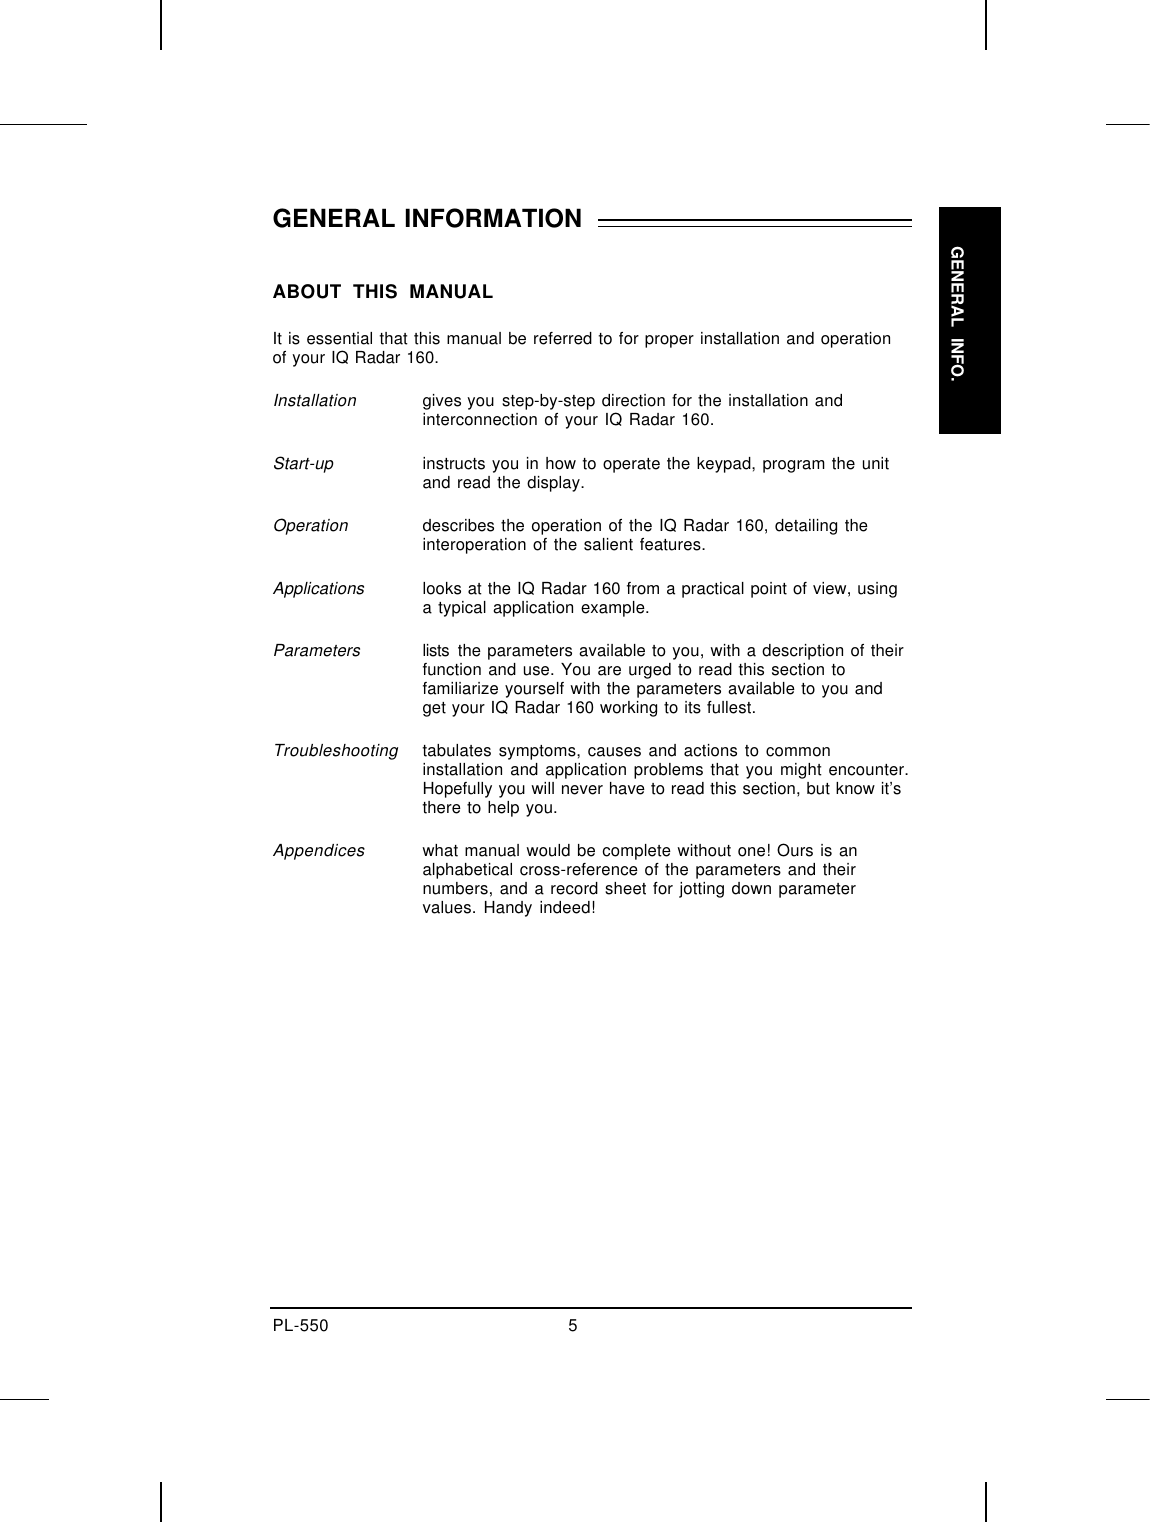 _PL-550 5GENERALLINFO. _GENERAL INFORMATION  ABOUT THIS MANUALIt is essential that this manual be referred to for proper installation and operationof your IQ Radar 160.Installationgives you step-by-step direction for the installation andinterconnection of your IQ Radar 160.Start-upinstructs you in how to operate the keypad, program the unitand read the display.Operationdescribes the operation of the IQ Radar 160, detailing theinteroperation of the salient features.Applications looks at the IQ Radar 160 from a practical point of view, usinga typical application example.Parameters lists the parameters available to you, with a description of theirfunction and use. You are urged to read this section tofamiliarize yourself with the parameters available to you andget your IQ Radar 160 working to its fullest.Troubleshootingtabulates symptoms, causes and actions to commoninstallation and application problems that you might encounter.Hopefully you will never have to read this section, but know it’sthere to help you.Appendiceswhat manual would be complete without one! Ours is analphabetical cross-reference of the parameters and theirnumbers, and a record sheet for jotting down parametervalues. Handy indeed!